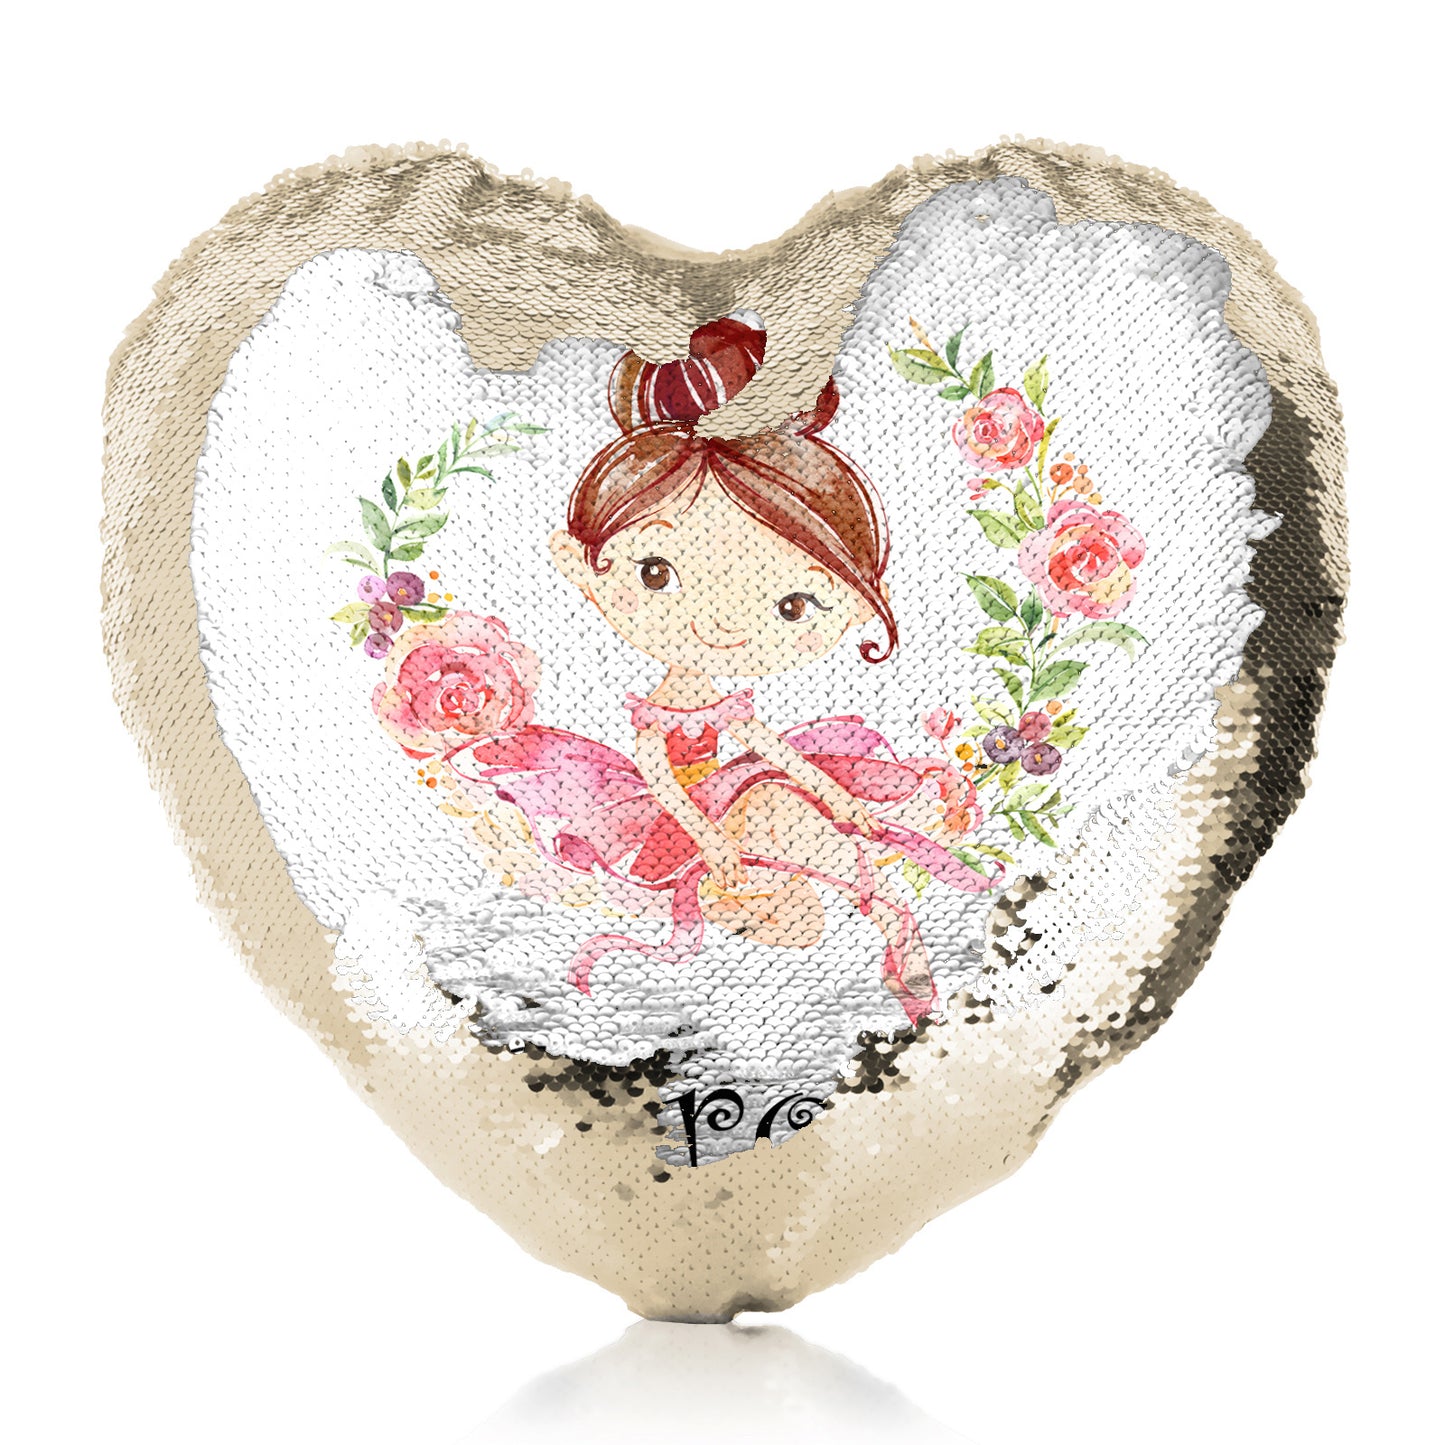 Personalised Sequin Heart Cushion with Cute Text and Flower Wreath Light Brown Hair Ballerina